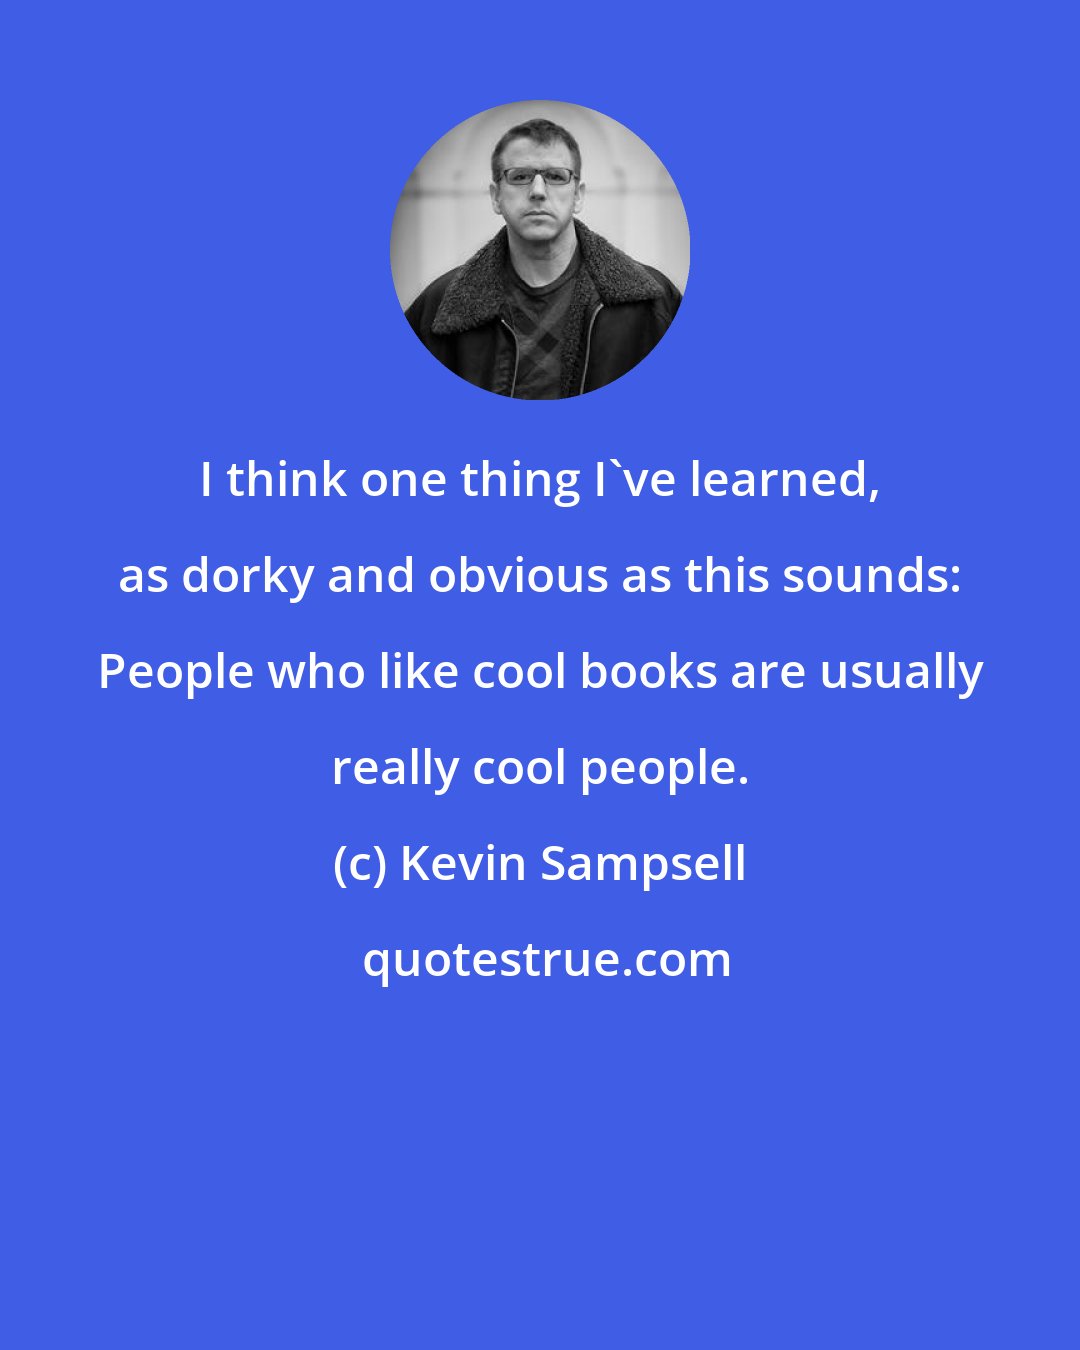 Kevin Sampsell: I think one thing I've learned, as dorky and obvious as this sounds: People who like cool books are usually really cool people.